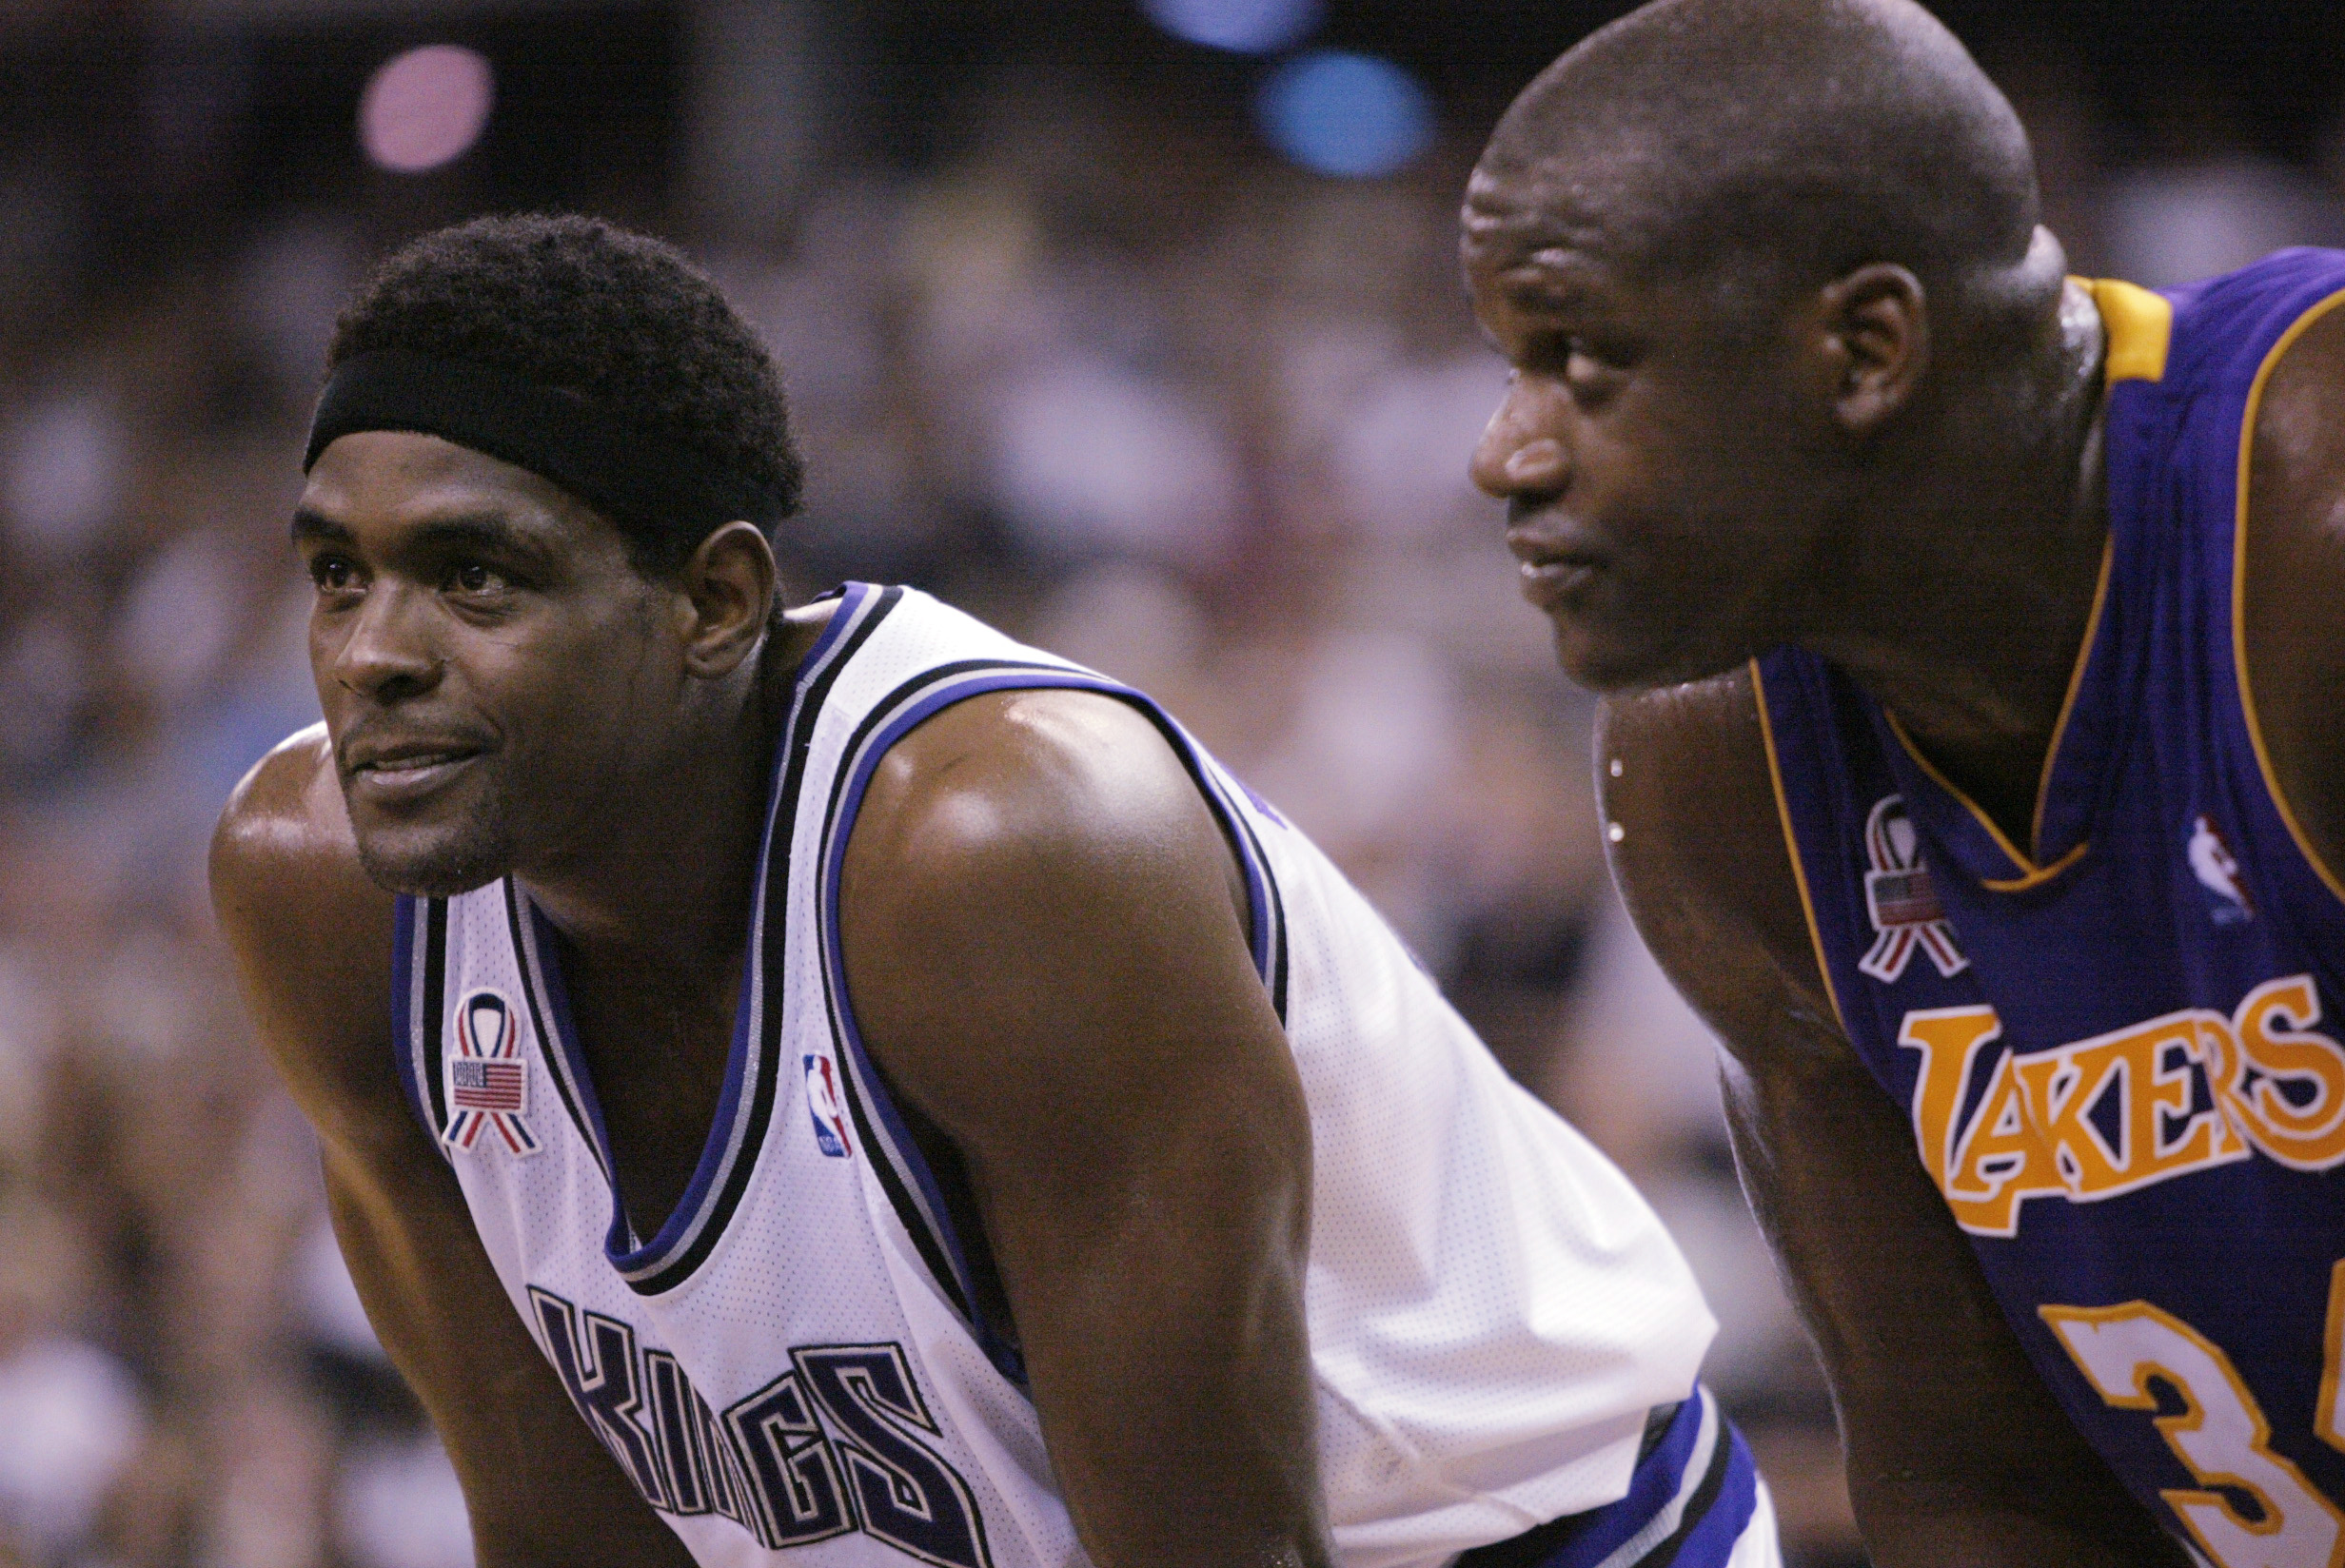 30 Coolest Nba Players Of The 90s For The Win